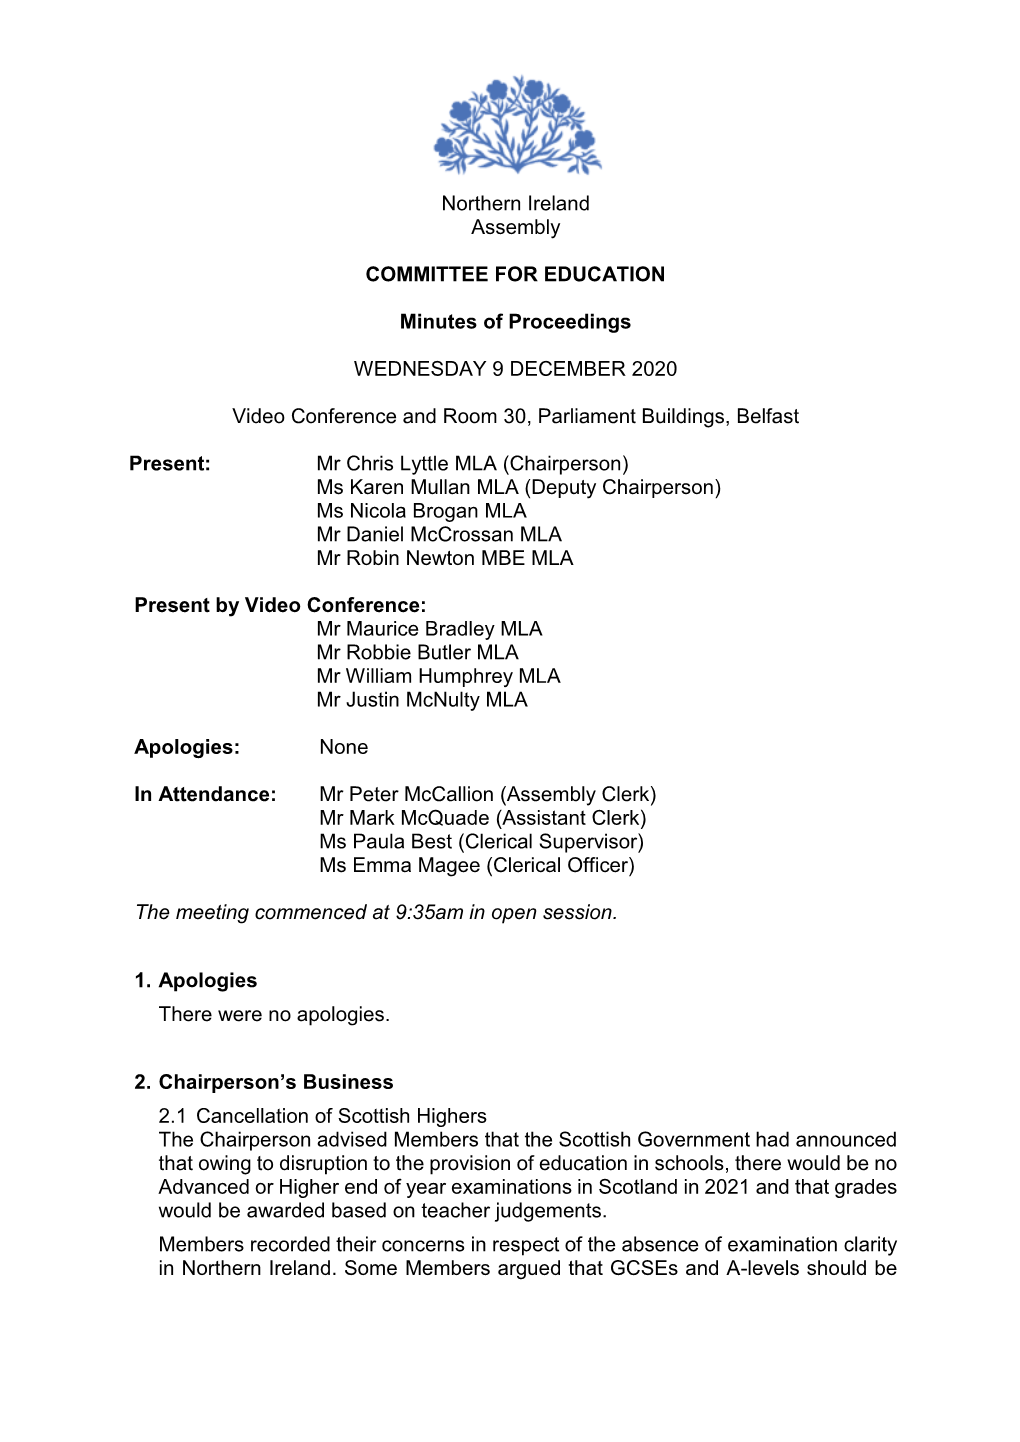 Committee for Education Meeting Minutes of Proceedings 9